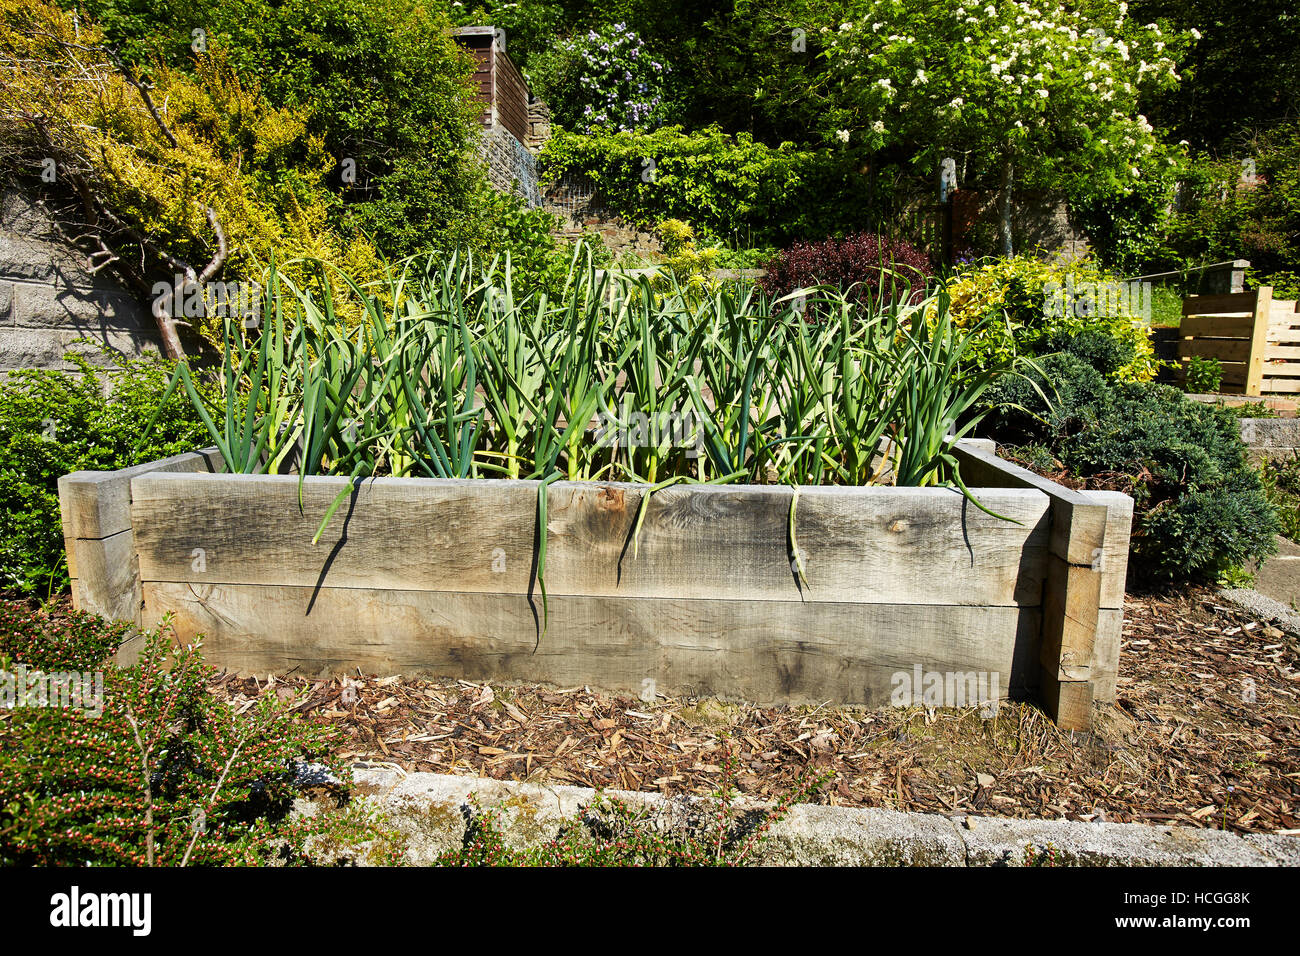 Garlic growing in a raised bed in a garden in Wales, UK Stock Photo